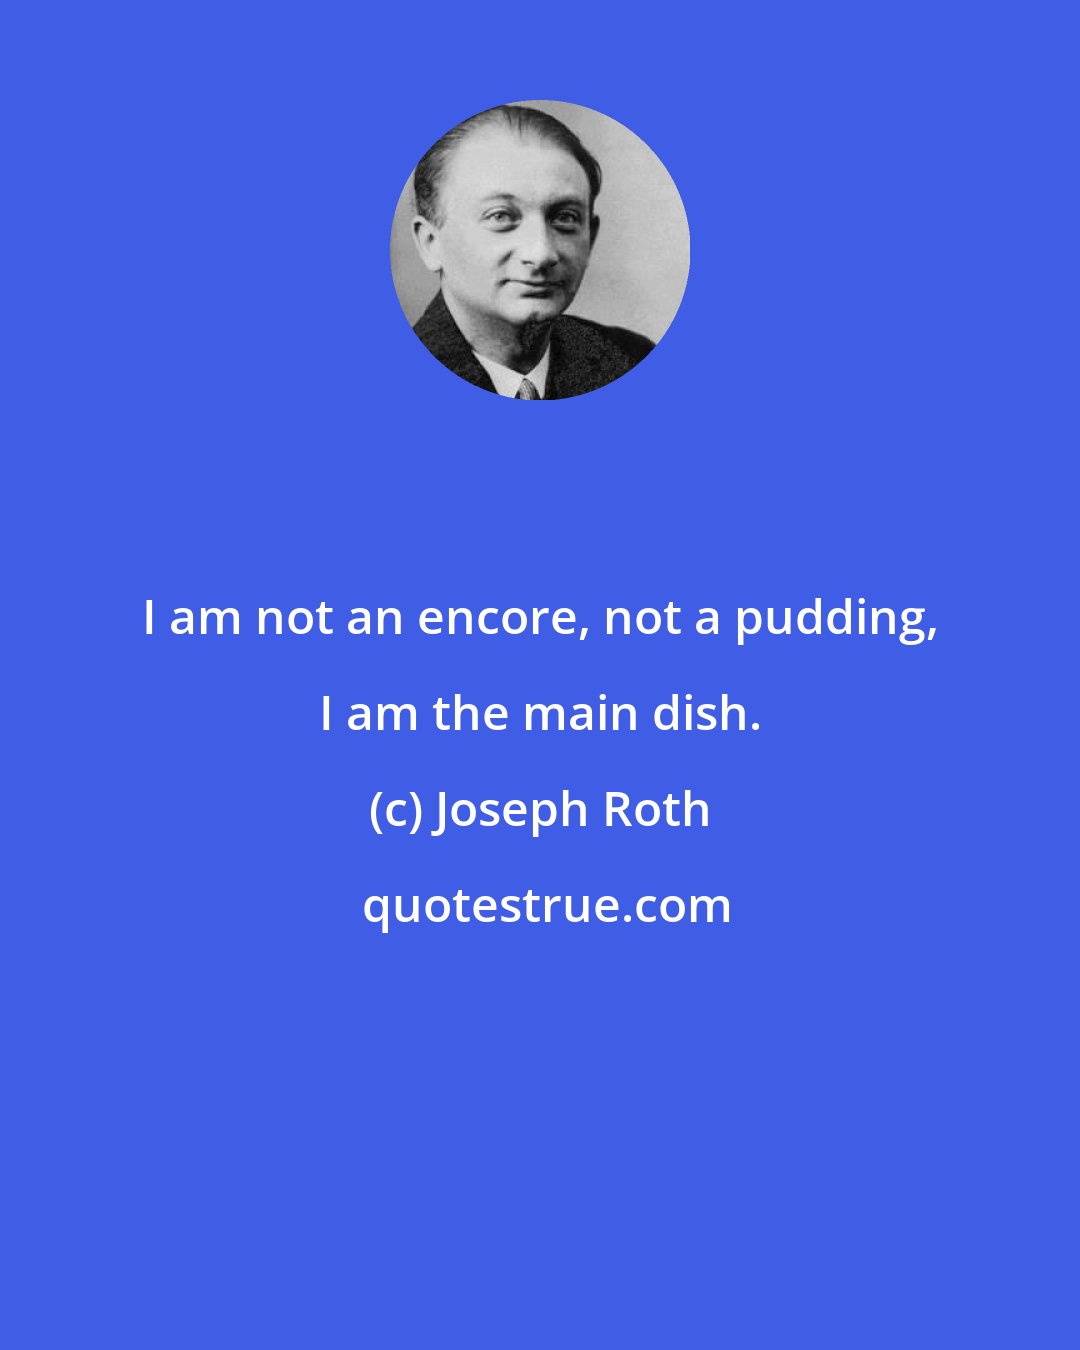 Joseph Roth: I am not an encore, not a pudding, I am the main dish.